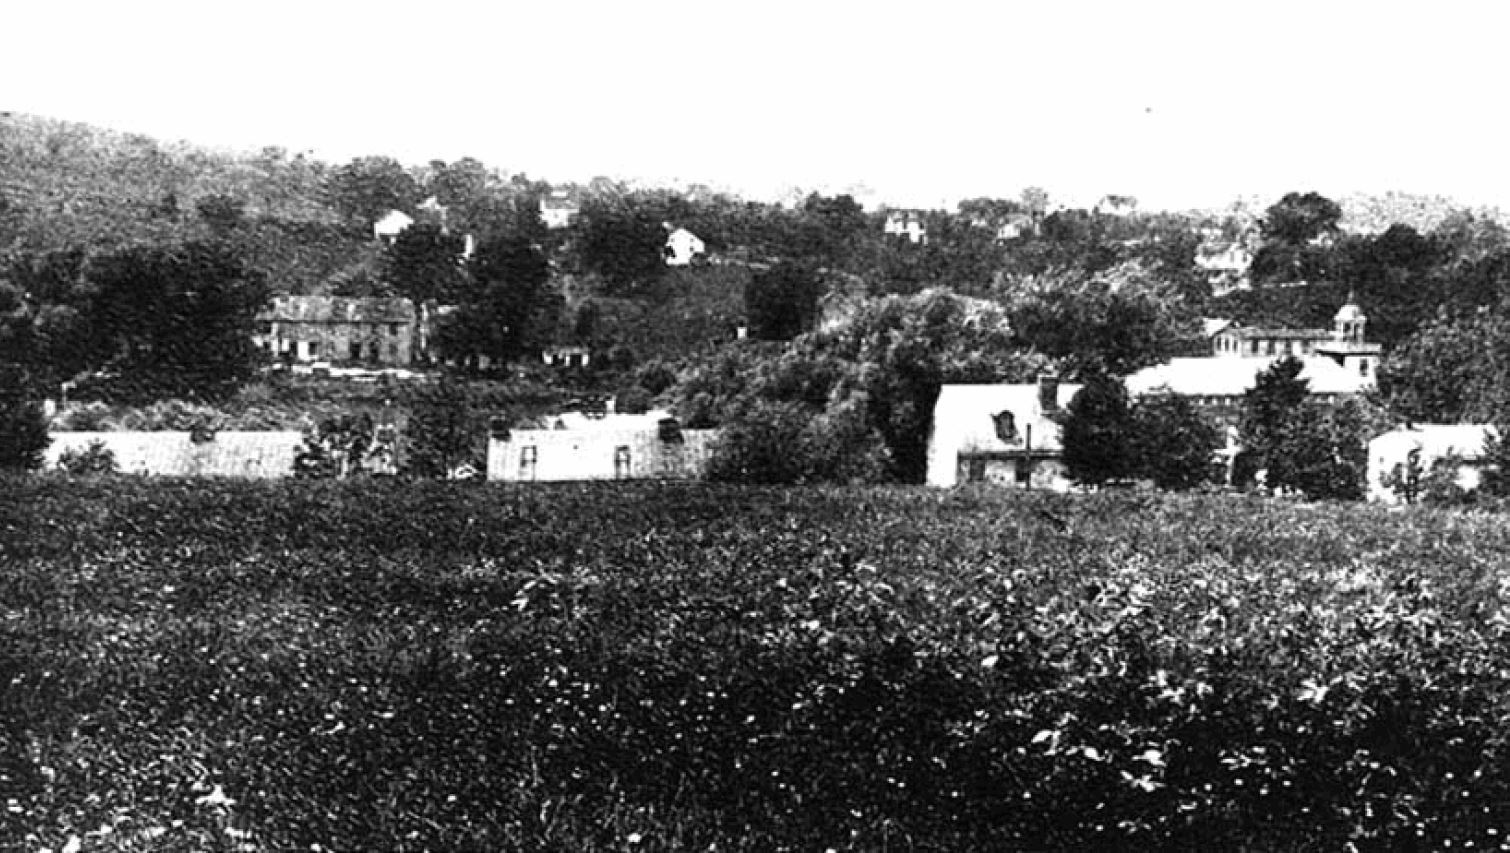 VF village, 1890s failed to load